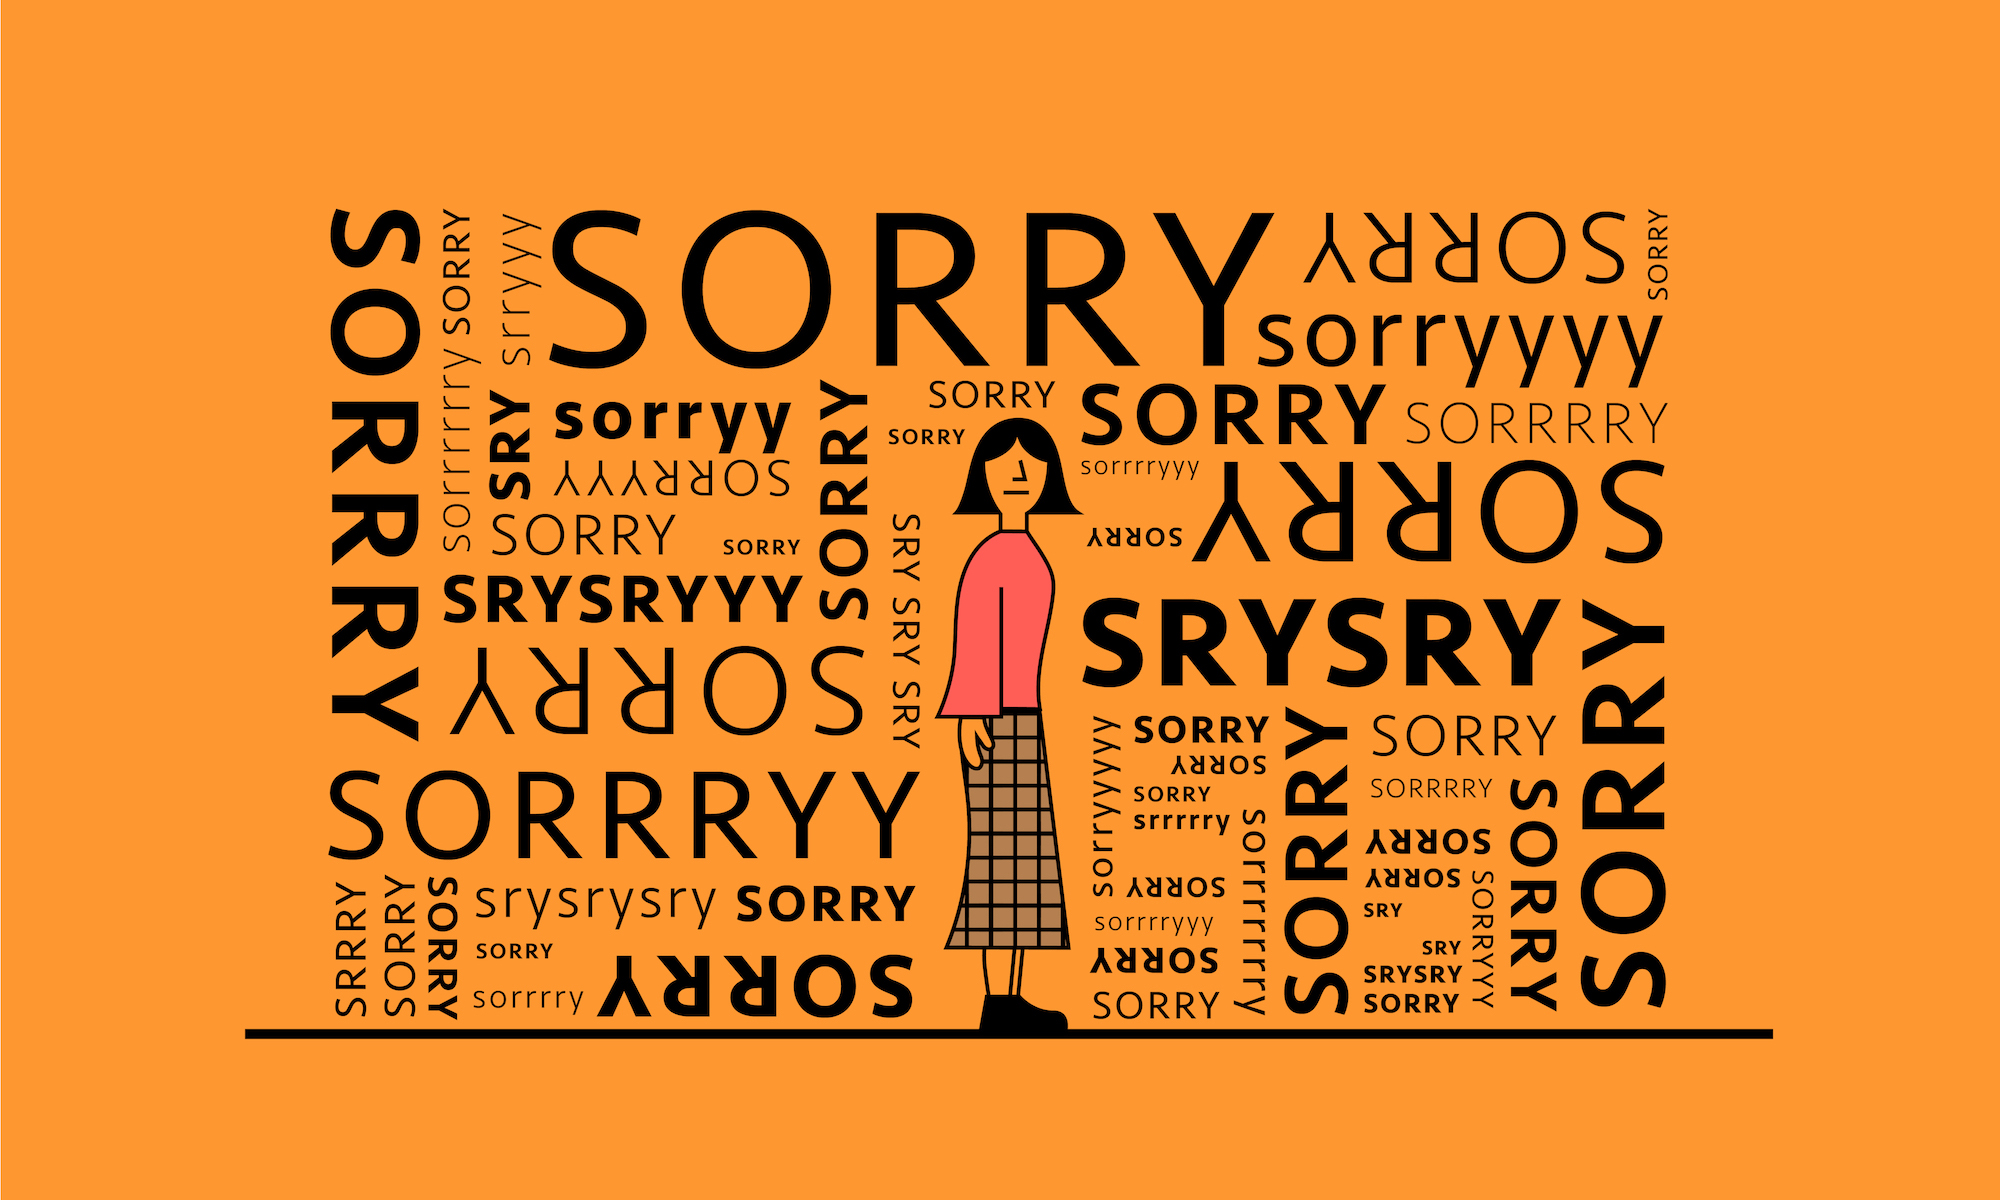 Five Other Ways To Say “Sorry To Bother You” in an Email